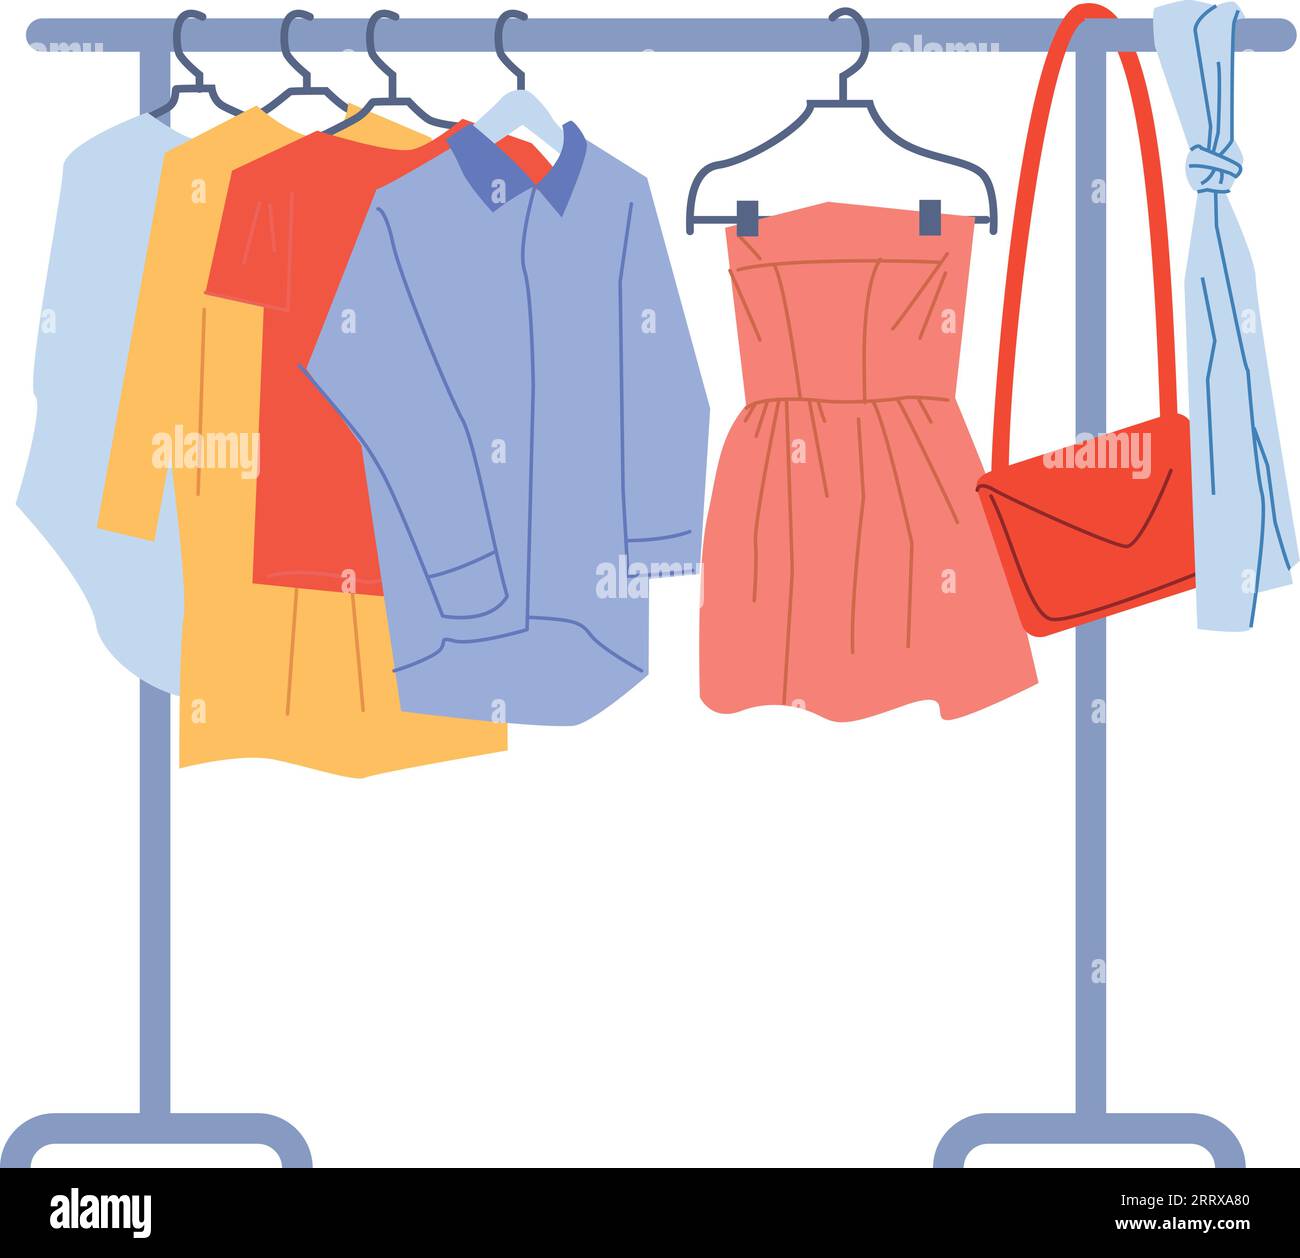 Wardrobe rack with hanging clothes. Outfit store hanger isolated on white background Stock Vector